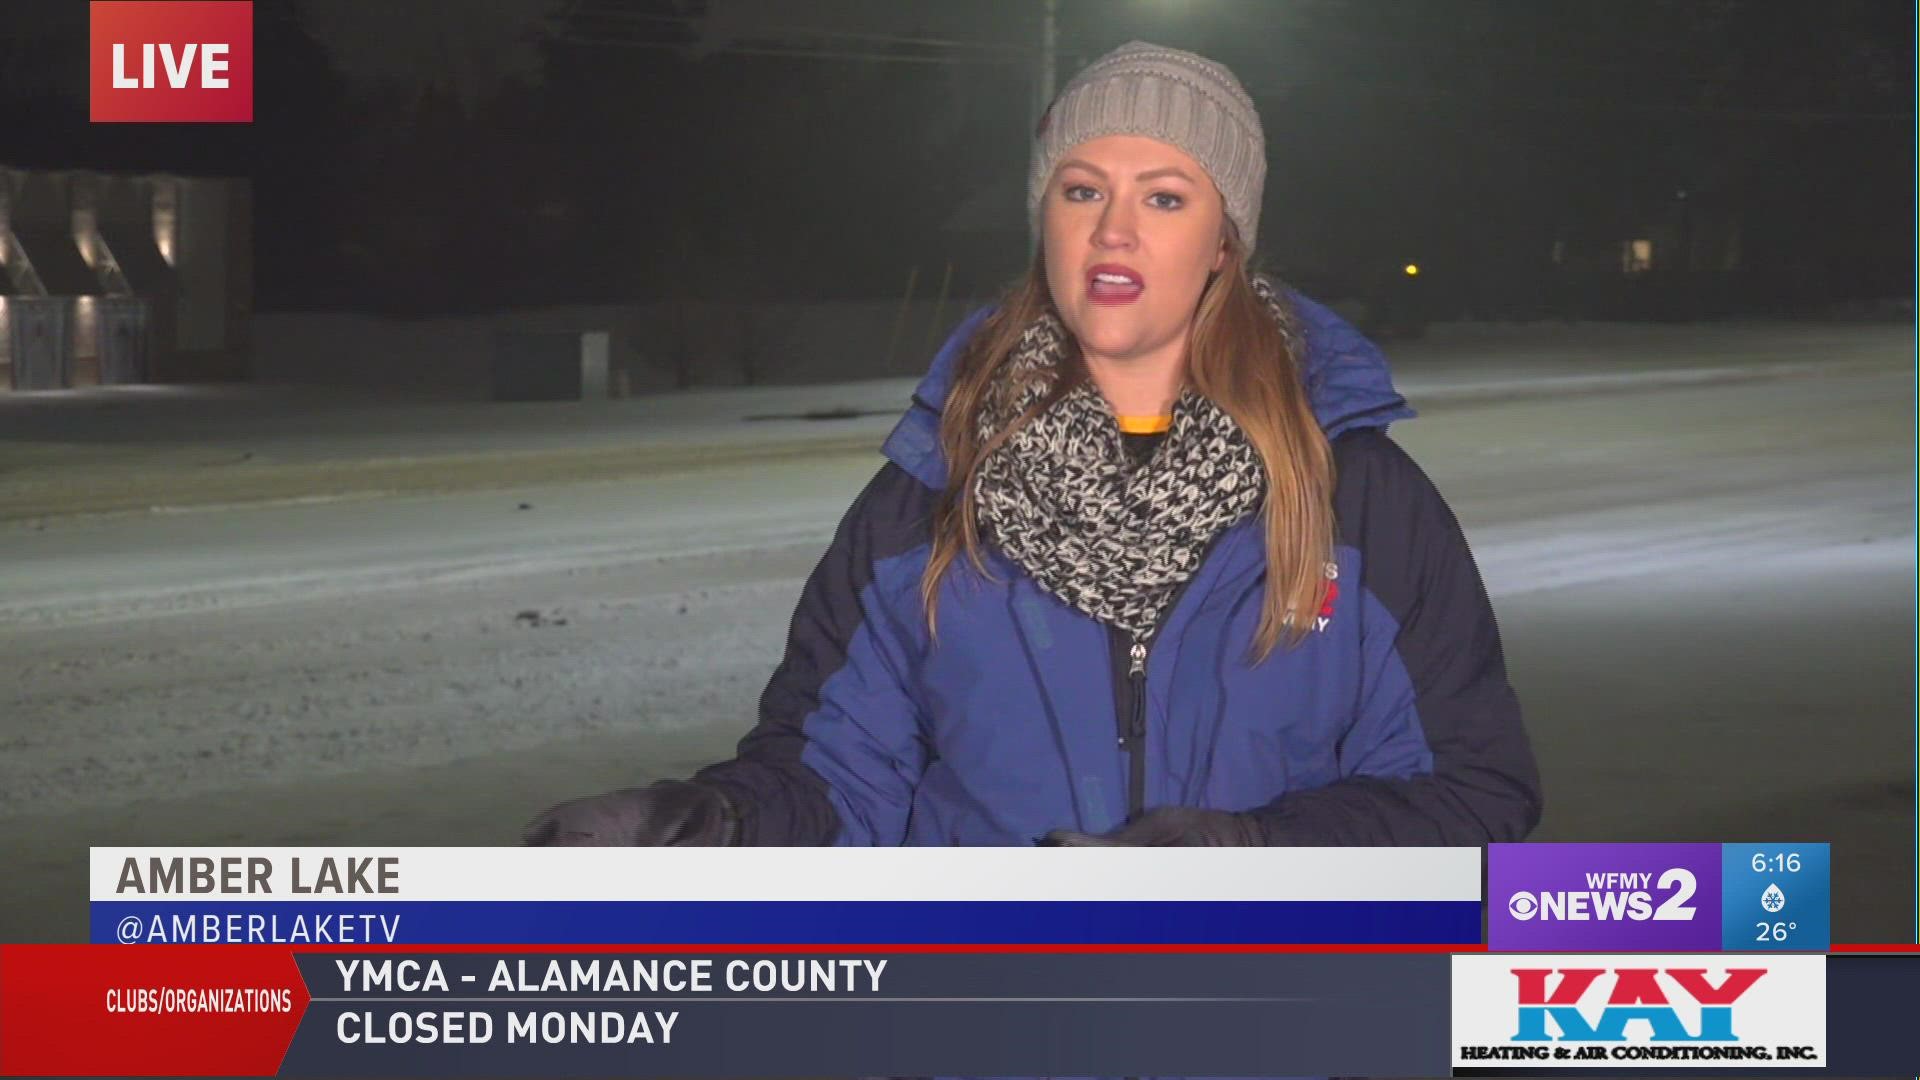 Latest on the road conditions in High Point and when plows will hit the roads again.